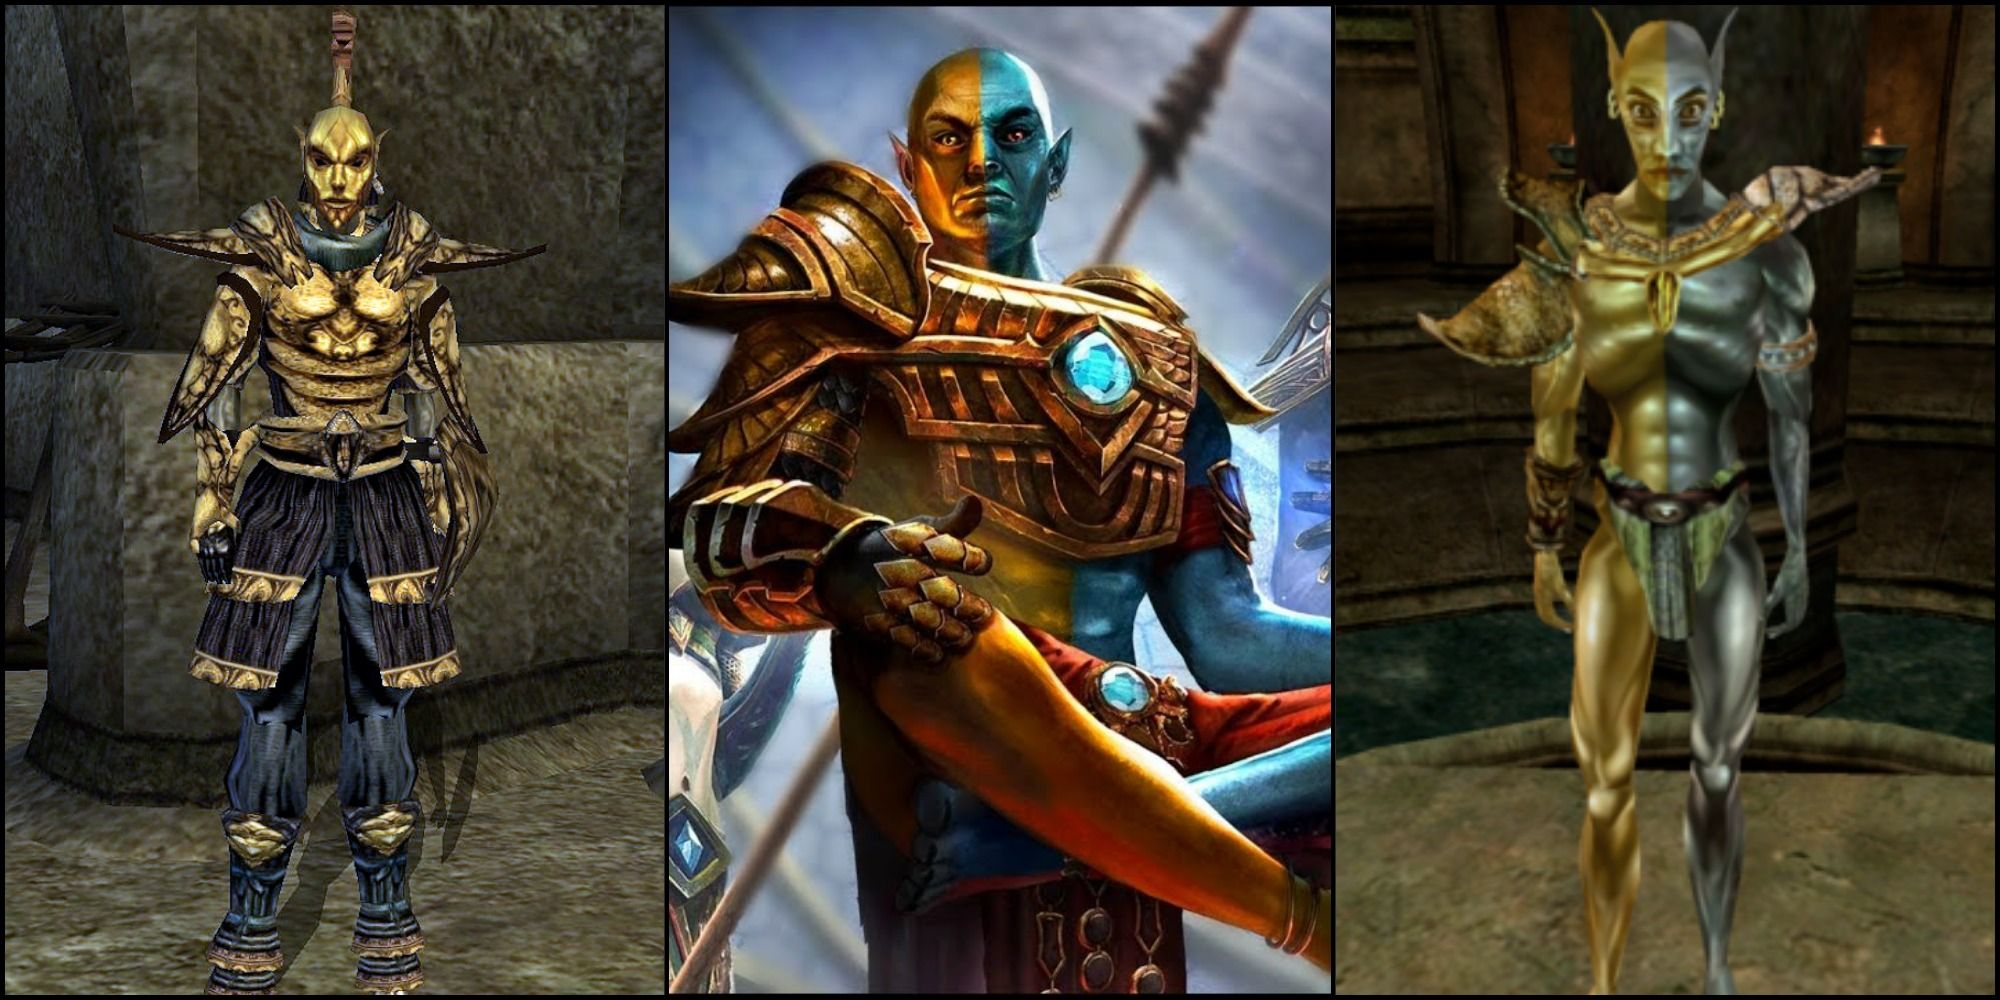 An Elder Scrolls split image featuring an Ordinator to the left, Vivec art in the middle and Vivec from Morrowind to the right